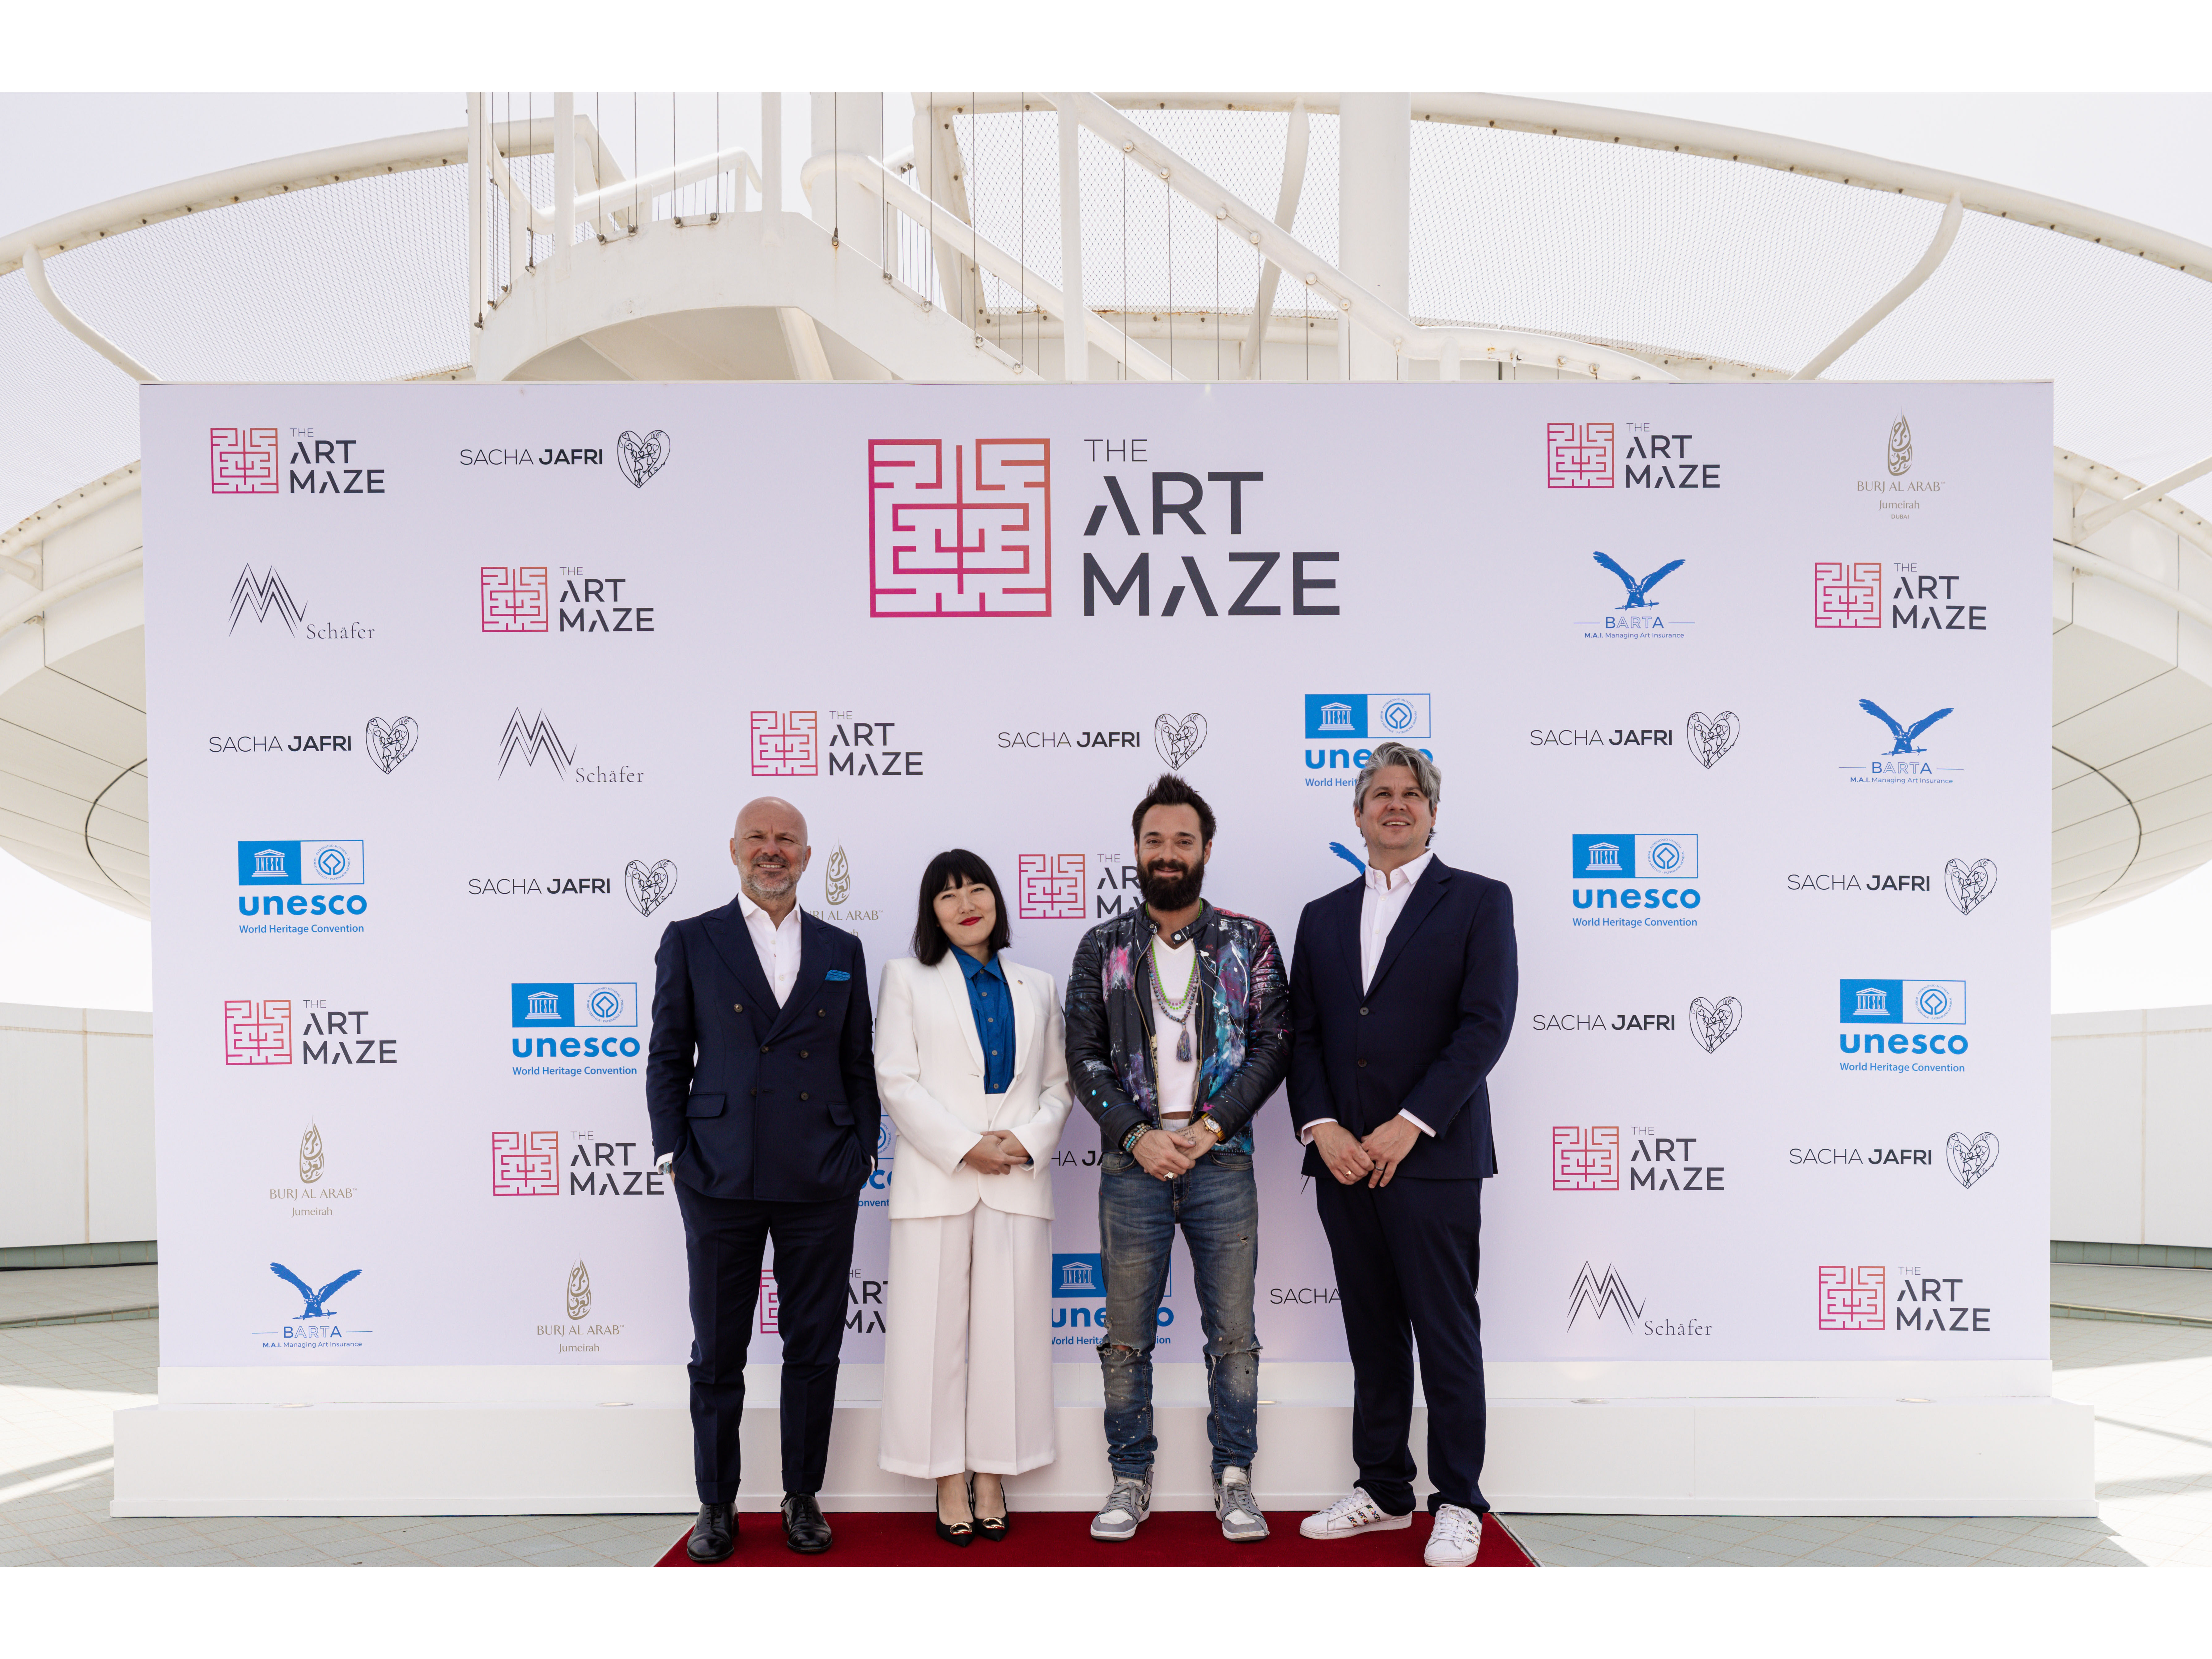 A first-of-its-kind art gallery experience by Marcus Schaefer and Sacha Jafri unveiled at Burj Al Arab Jumeirah Helipad